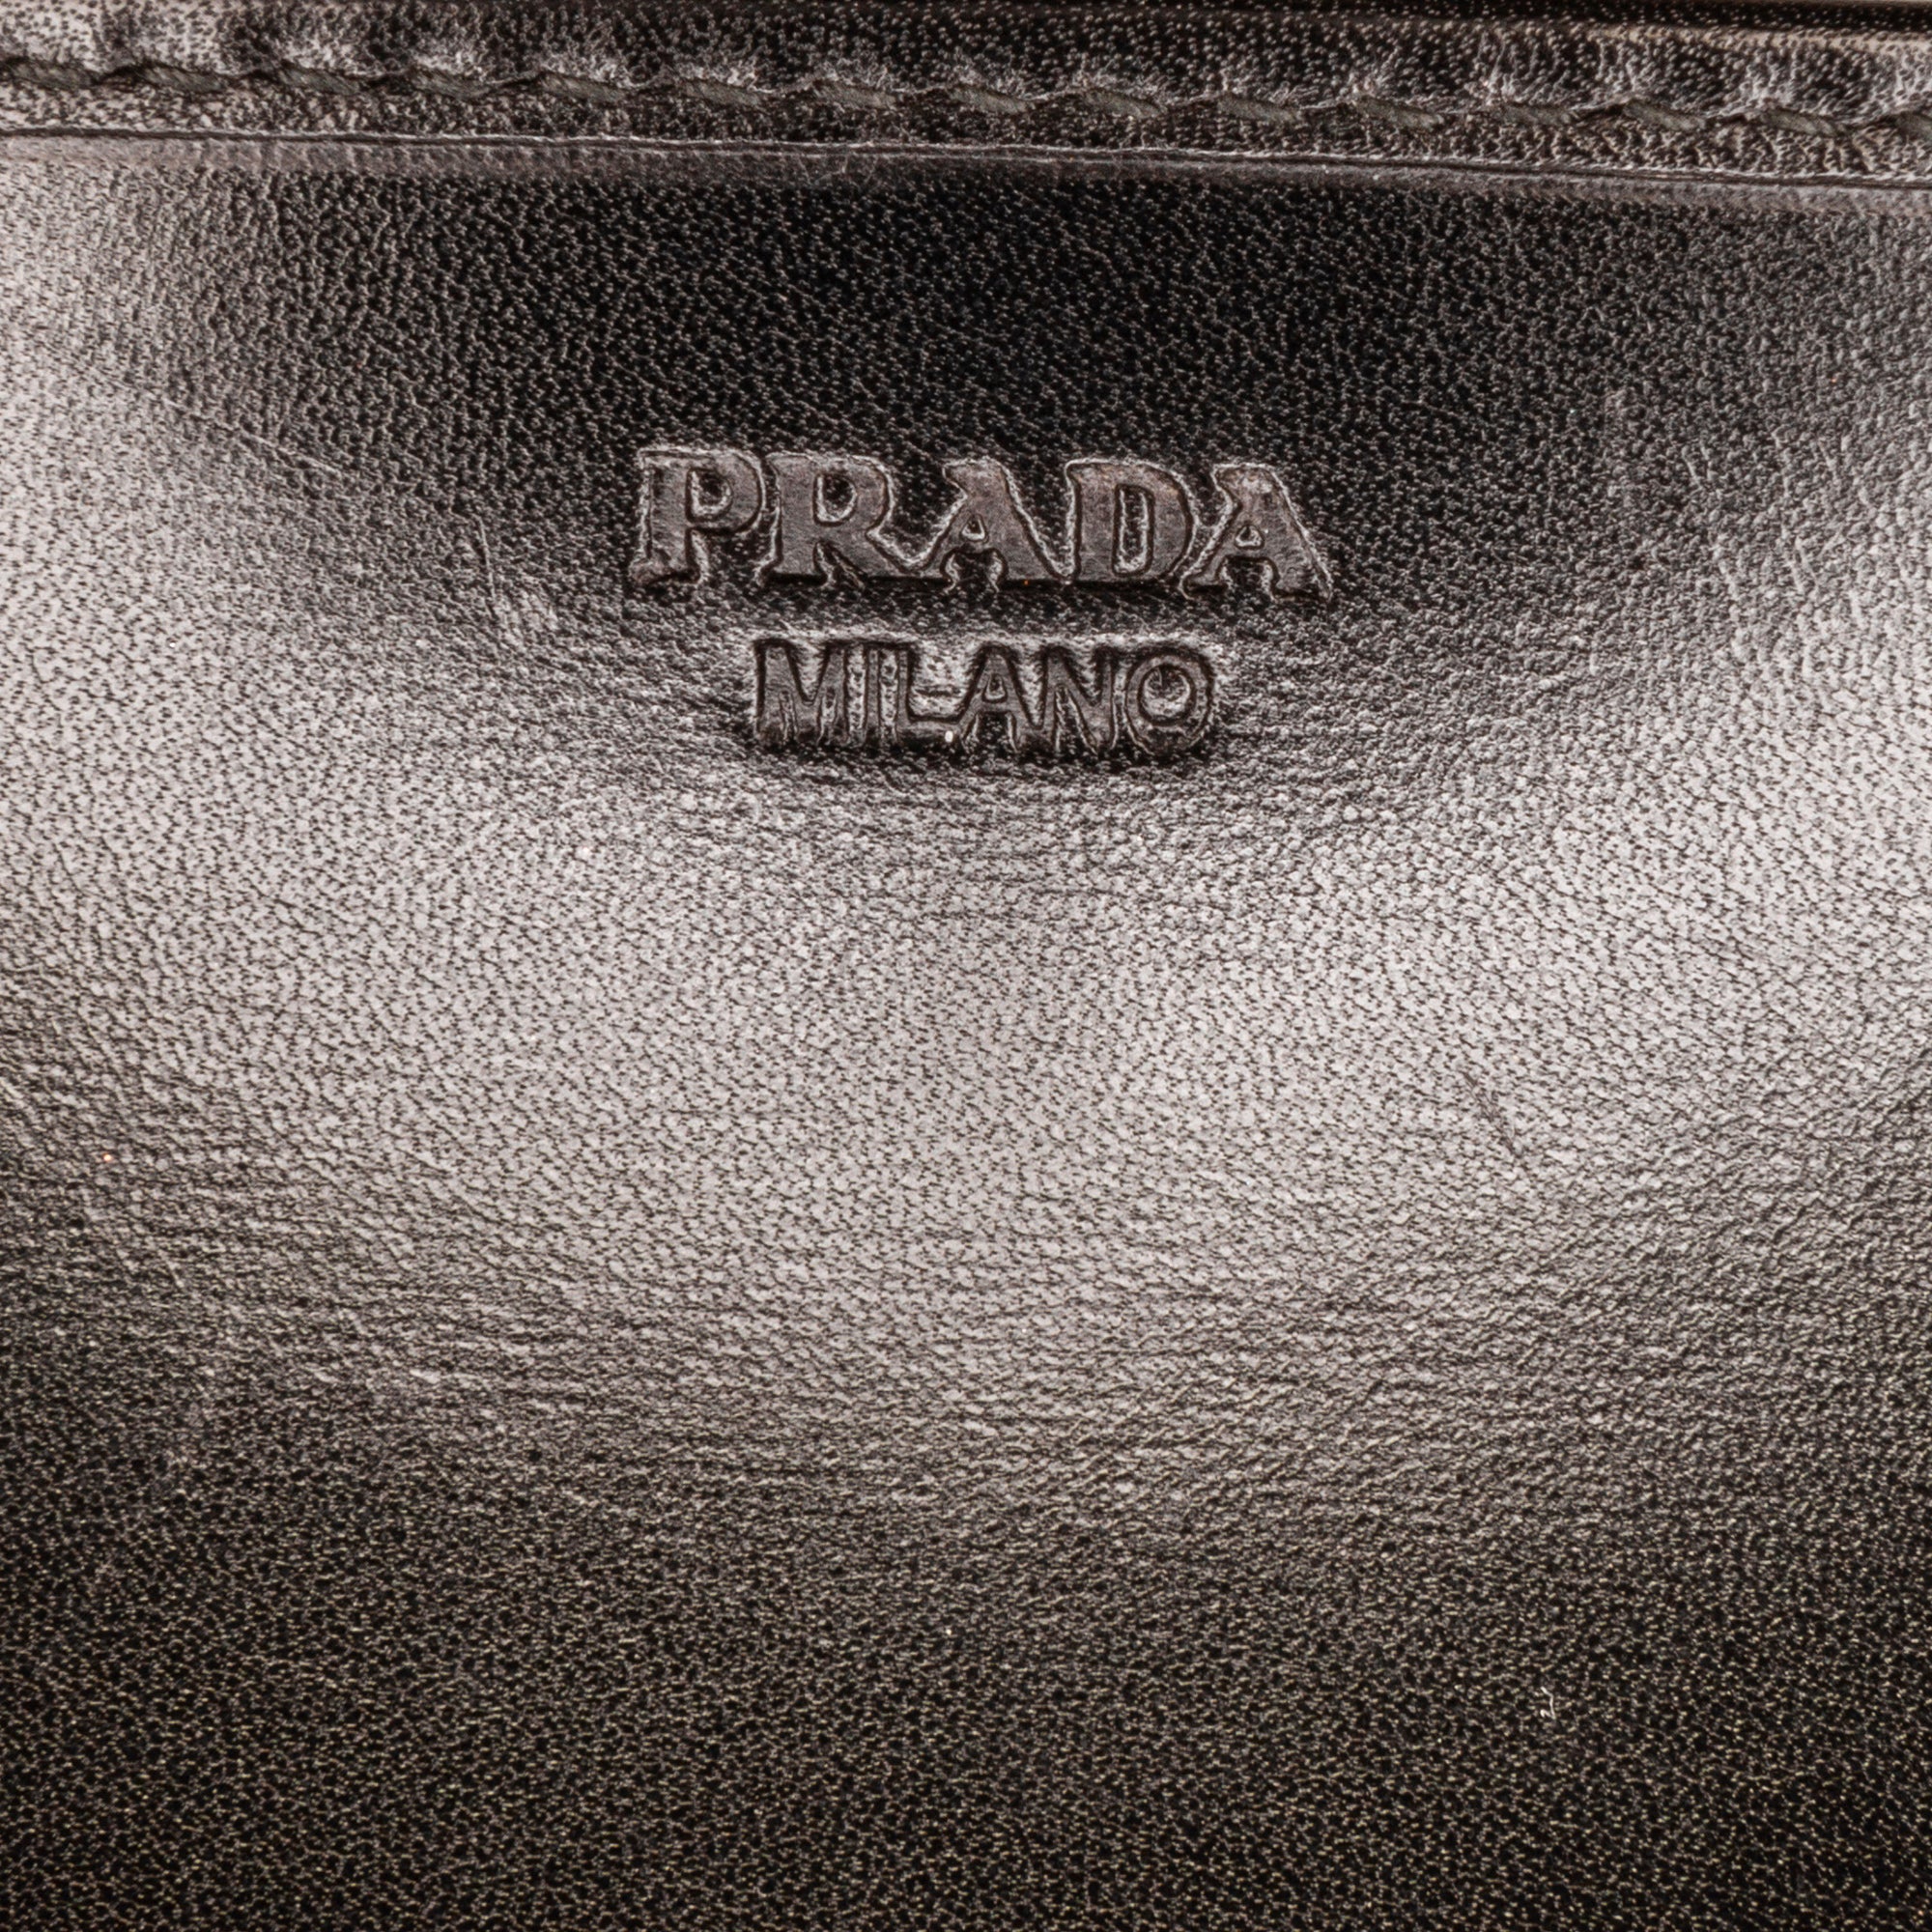 AUTHENTiC Prada Saffiano Leather Crossbody wallet on Strap with